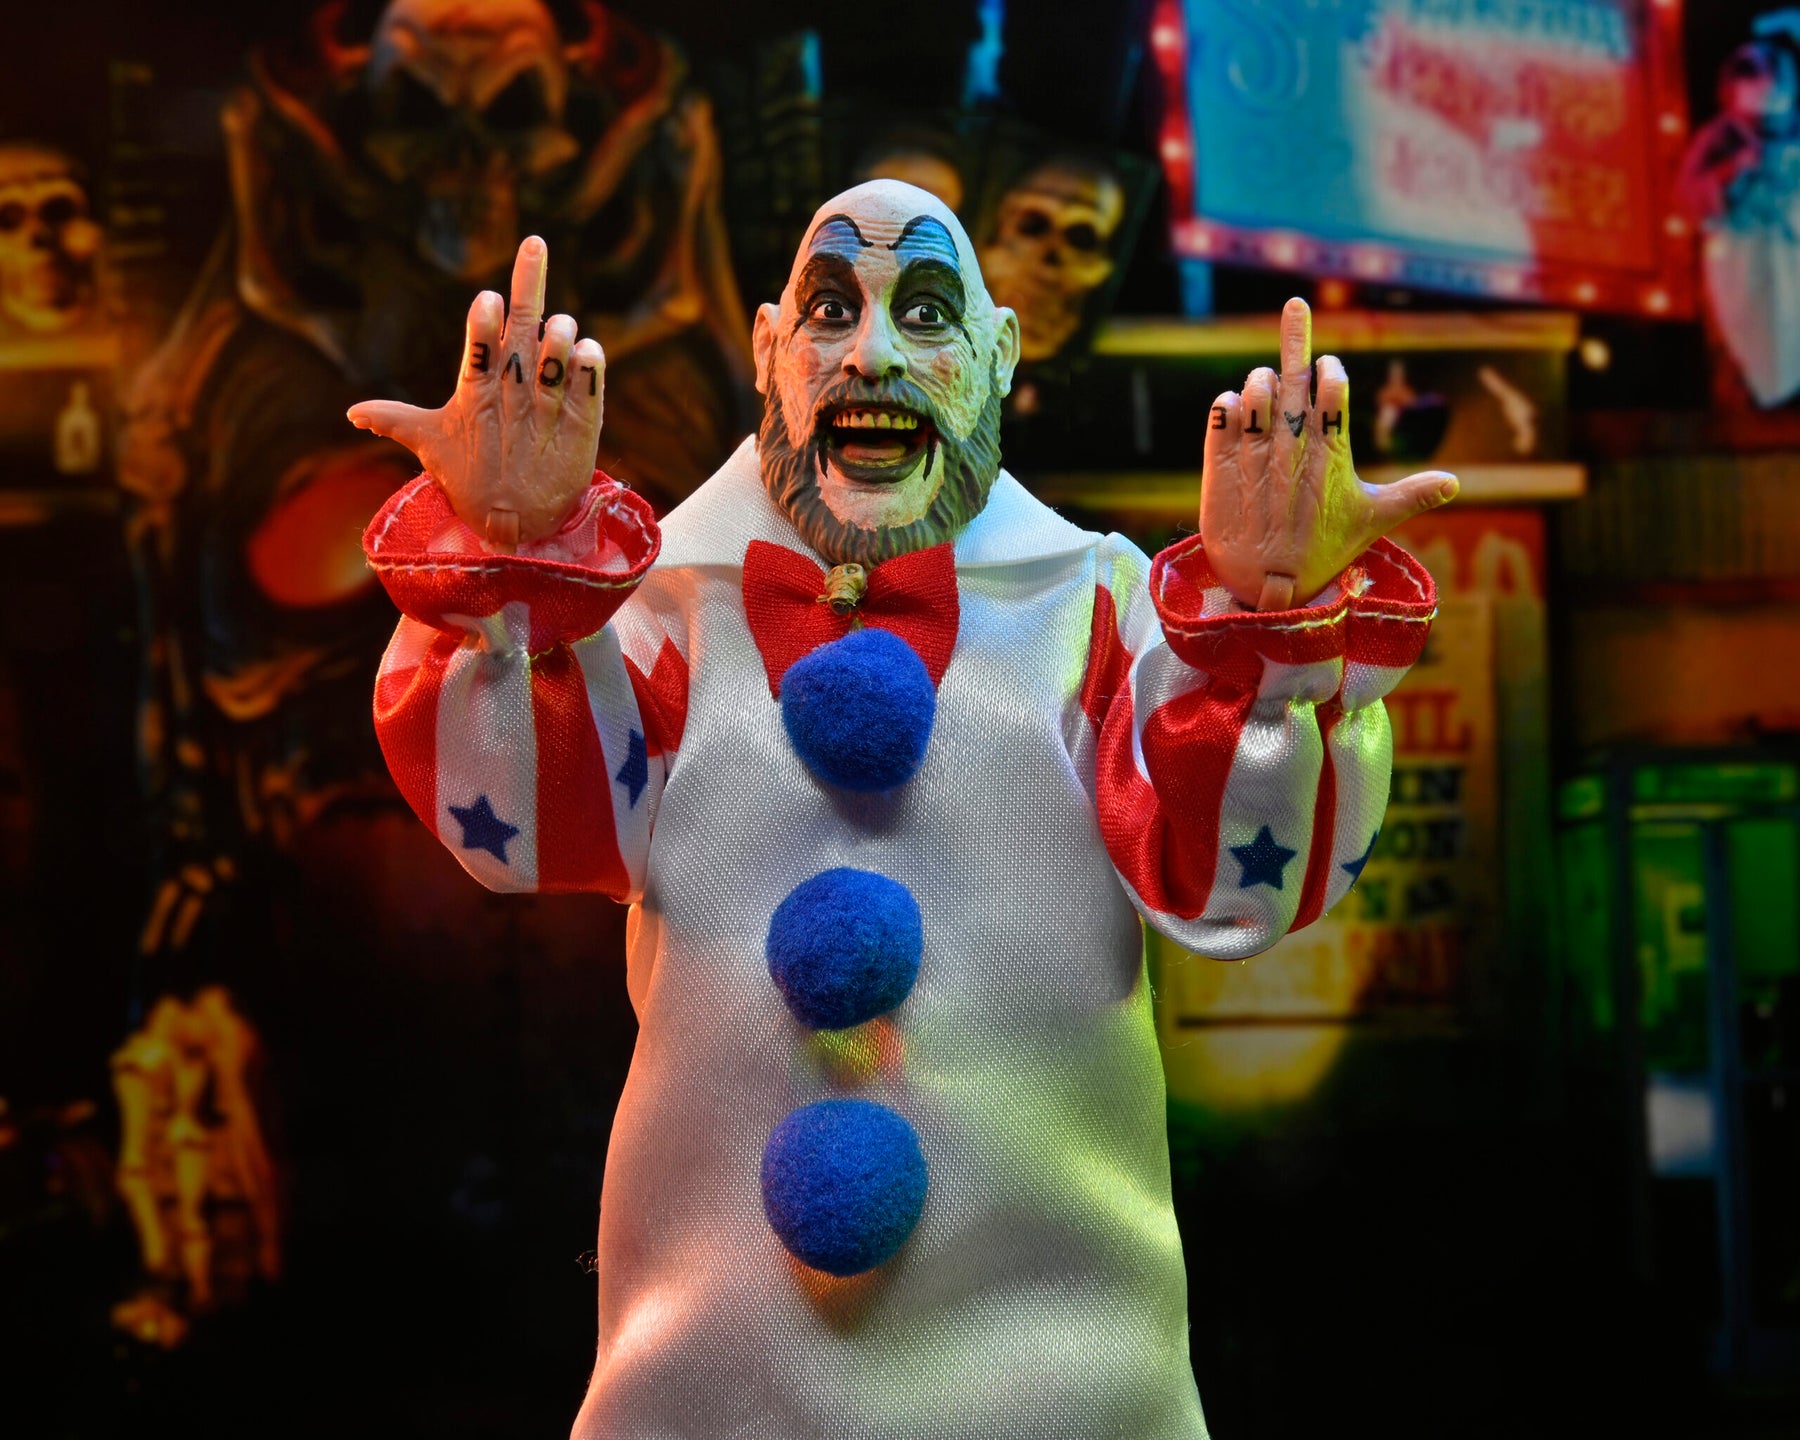 NECA - House of 1000 Corpses - Captain Spaulding (20th Anniversary) 8" Clothed Action Figure